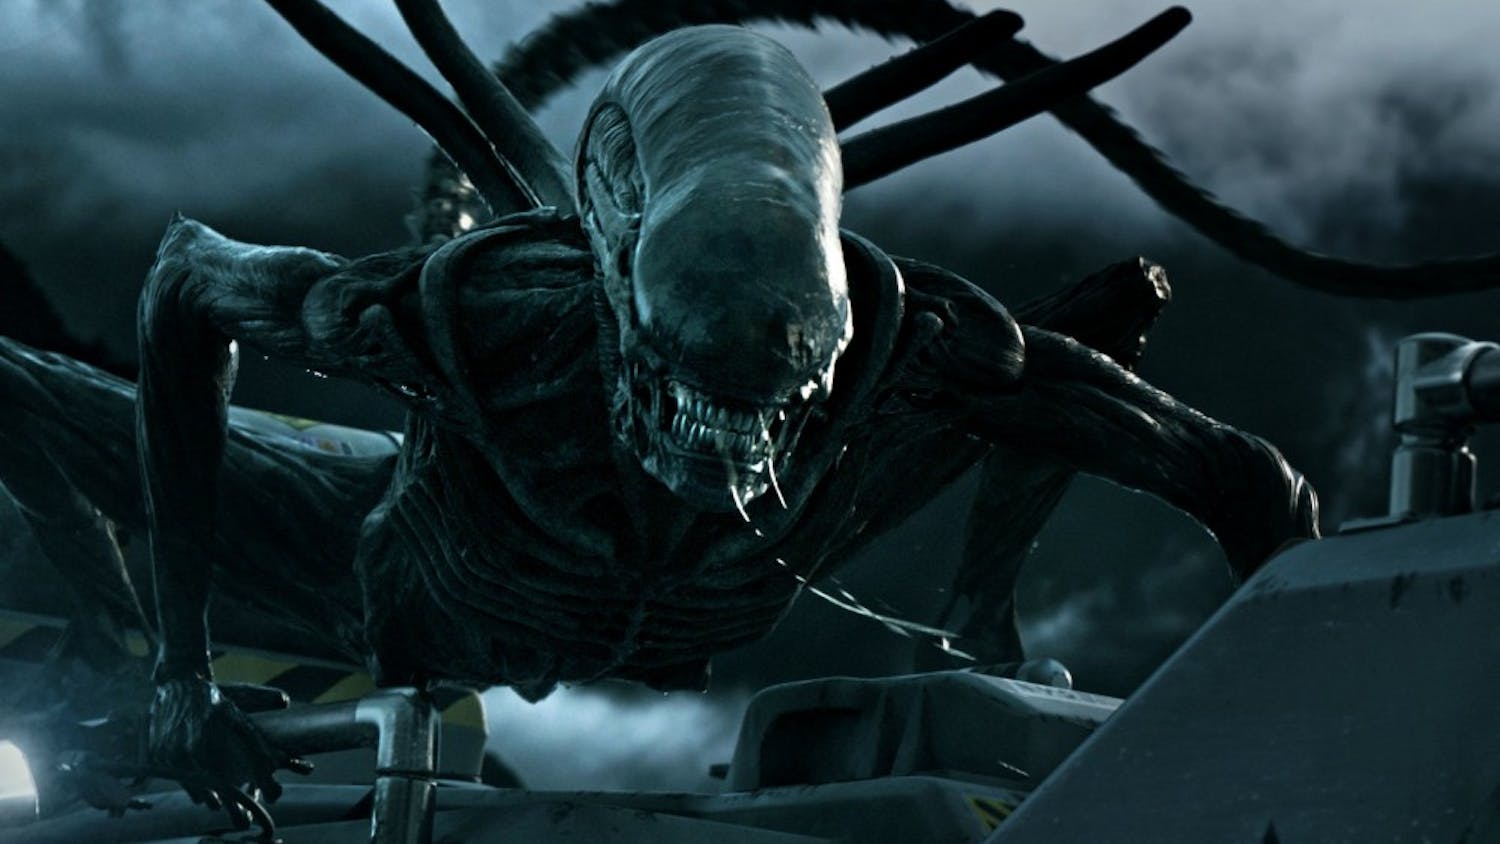 A xenomorph attacks in "Alien: Covenant," the latest film in the 38-year-old sci-fi horror franchise.